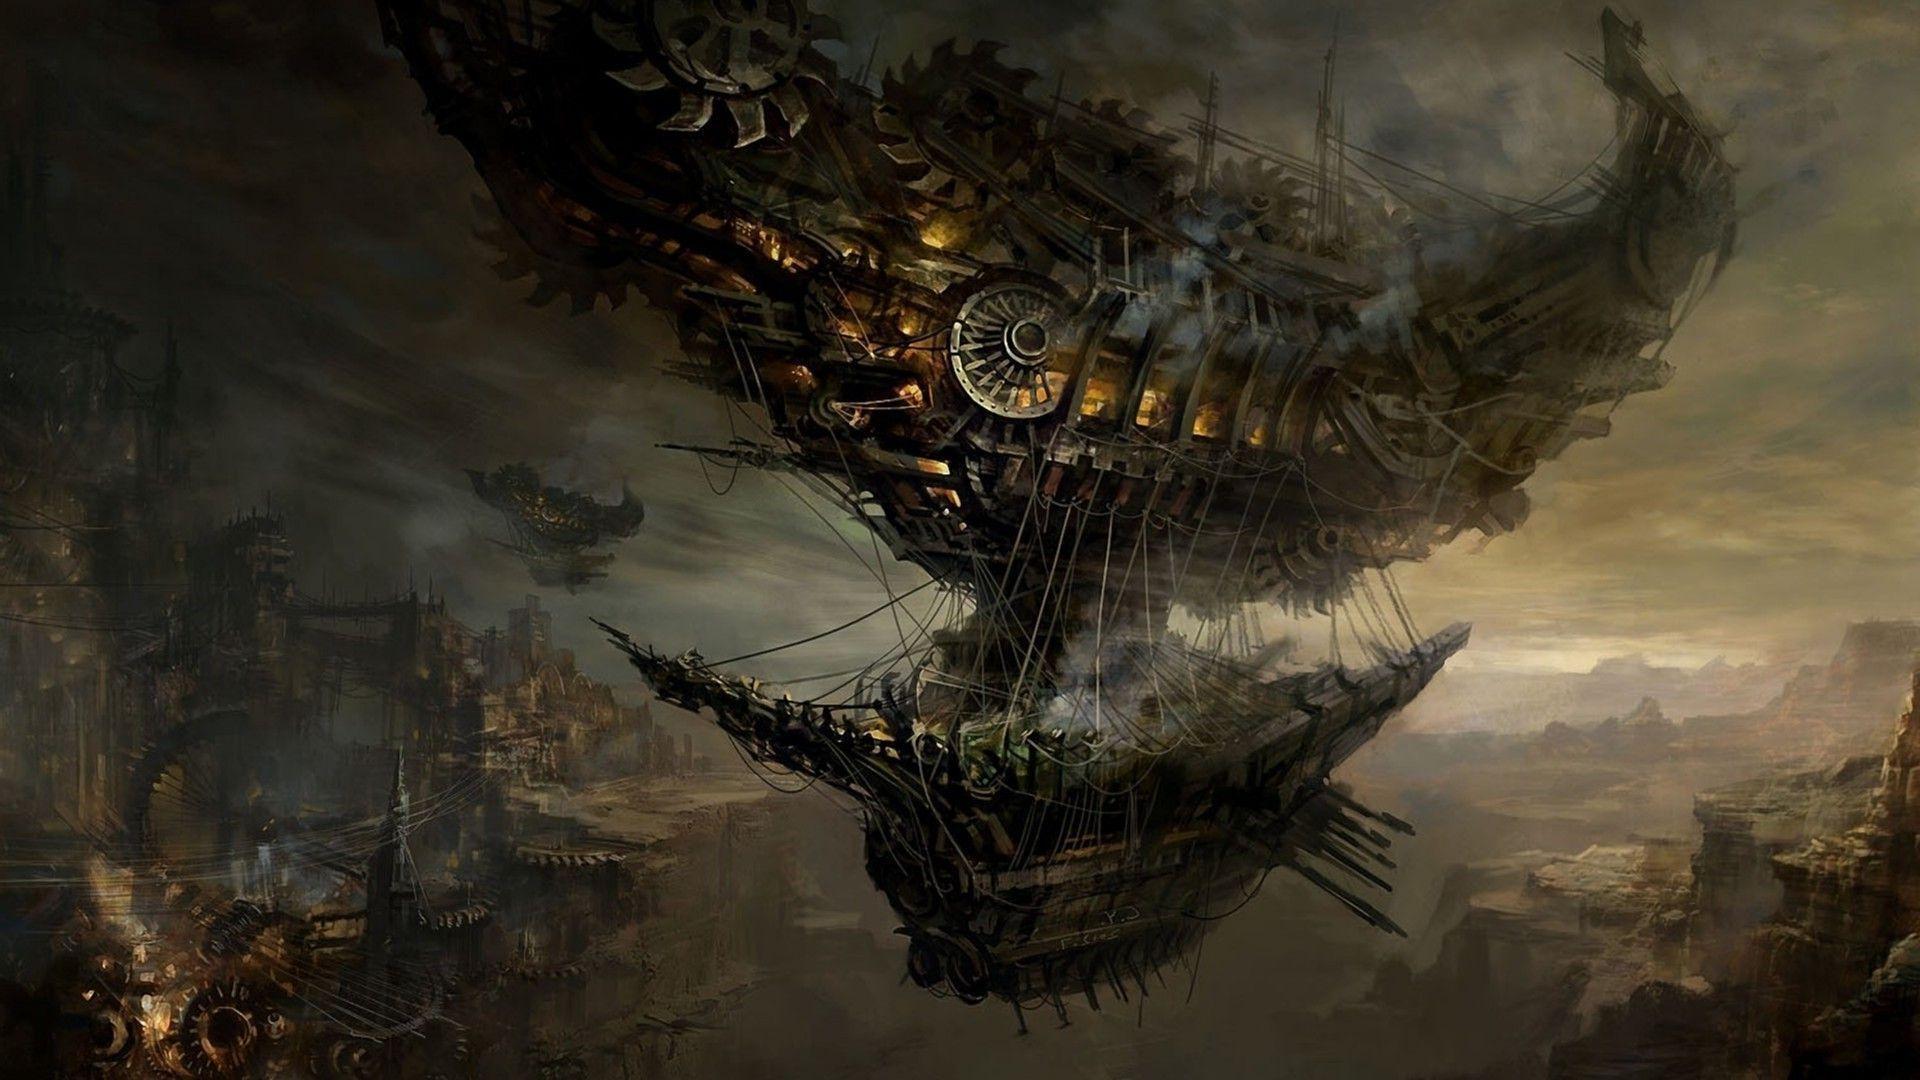 Steampunk wallpaper with a ship flying over a city - Steampunk